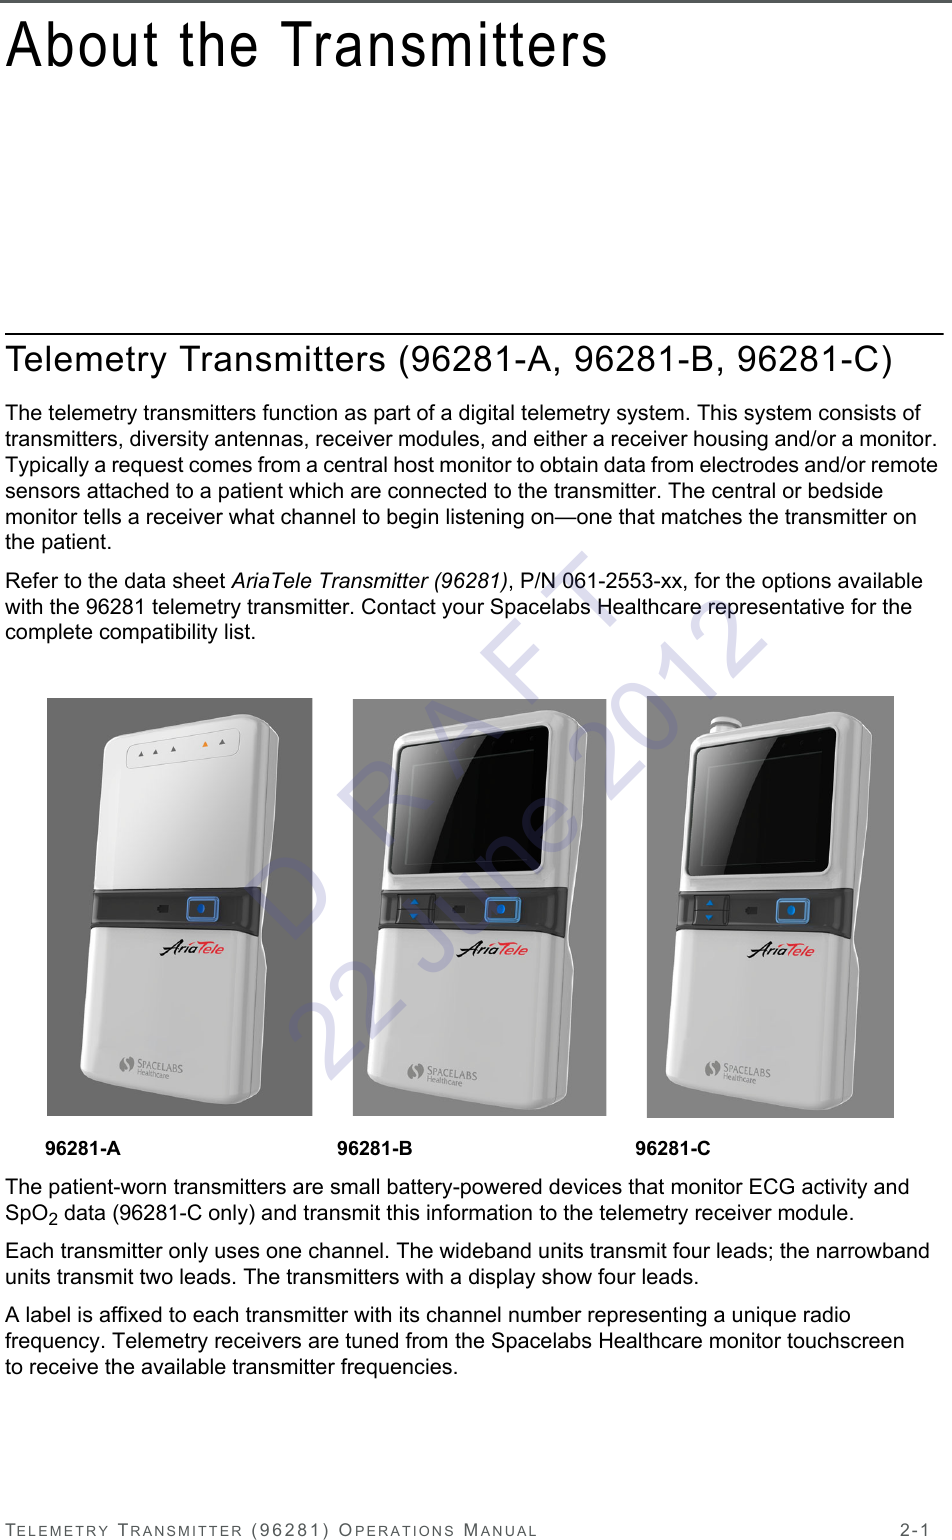 TELEMETRY TRANSMITTER (96281) OPERATIONS MANUAL 2-1About the TransmittersTelemetry Transmitters (96281-A, 96281-B, 96281-C)The telemetry transmitters function as part of a digital telemetry system. This system consists of transmitters, diversity antennas, receiver modules, and either a receiver housing and/or a monitor. Typically a request comes from a central host monitor to obtain data from electrodes and/or remote sensors attached to a patient which are connected to the transmitter. The central or bedside monitor tells a receiver what channel to begin listening on—one that matches the transmitter on the patient.Refer to the data sheet AriaTele Transmitter (96281), P/N 061-2553-xx, for the options available with the 96281 telemetry transmitter. Contact your Spacelabs Healthcare representative for the complete compatibility list.The patient-worn transmitters are small battery-powered devices that monitor ECG activity and SpO2 data (96281-C only) and transmit this information to the telemetry receiver module.Each transmitter only uses one channel. The wideband units transmit four leads; the narrowband units transmit two leads. The transmitters with a display show four leads. A label is affixed to each transmitter with its channel number representing a unique radio frequency. Telemetry receivers are tuned from the Spacelabs Healthcare monitor touchscreen to receive the available transmitter frequencies. 96281-A 96281-B 96281-CD  R A F T 22 June 2012